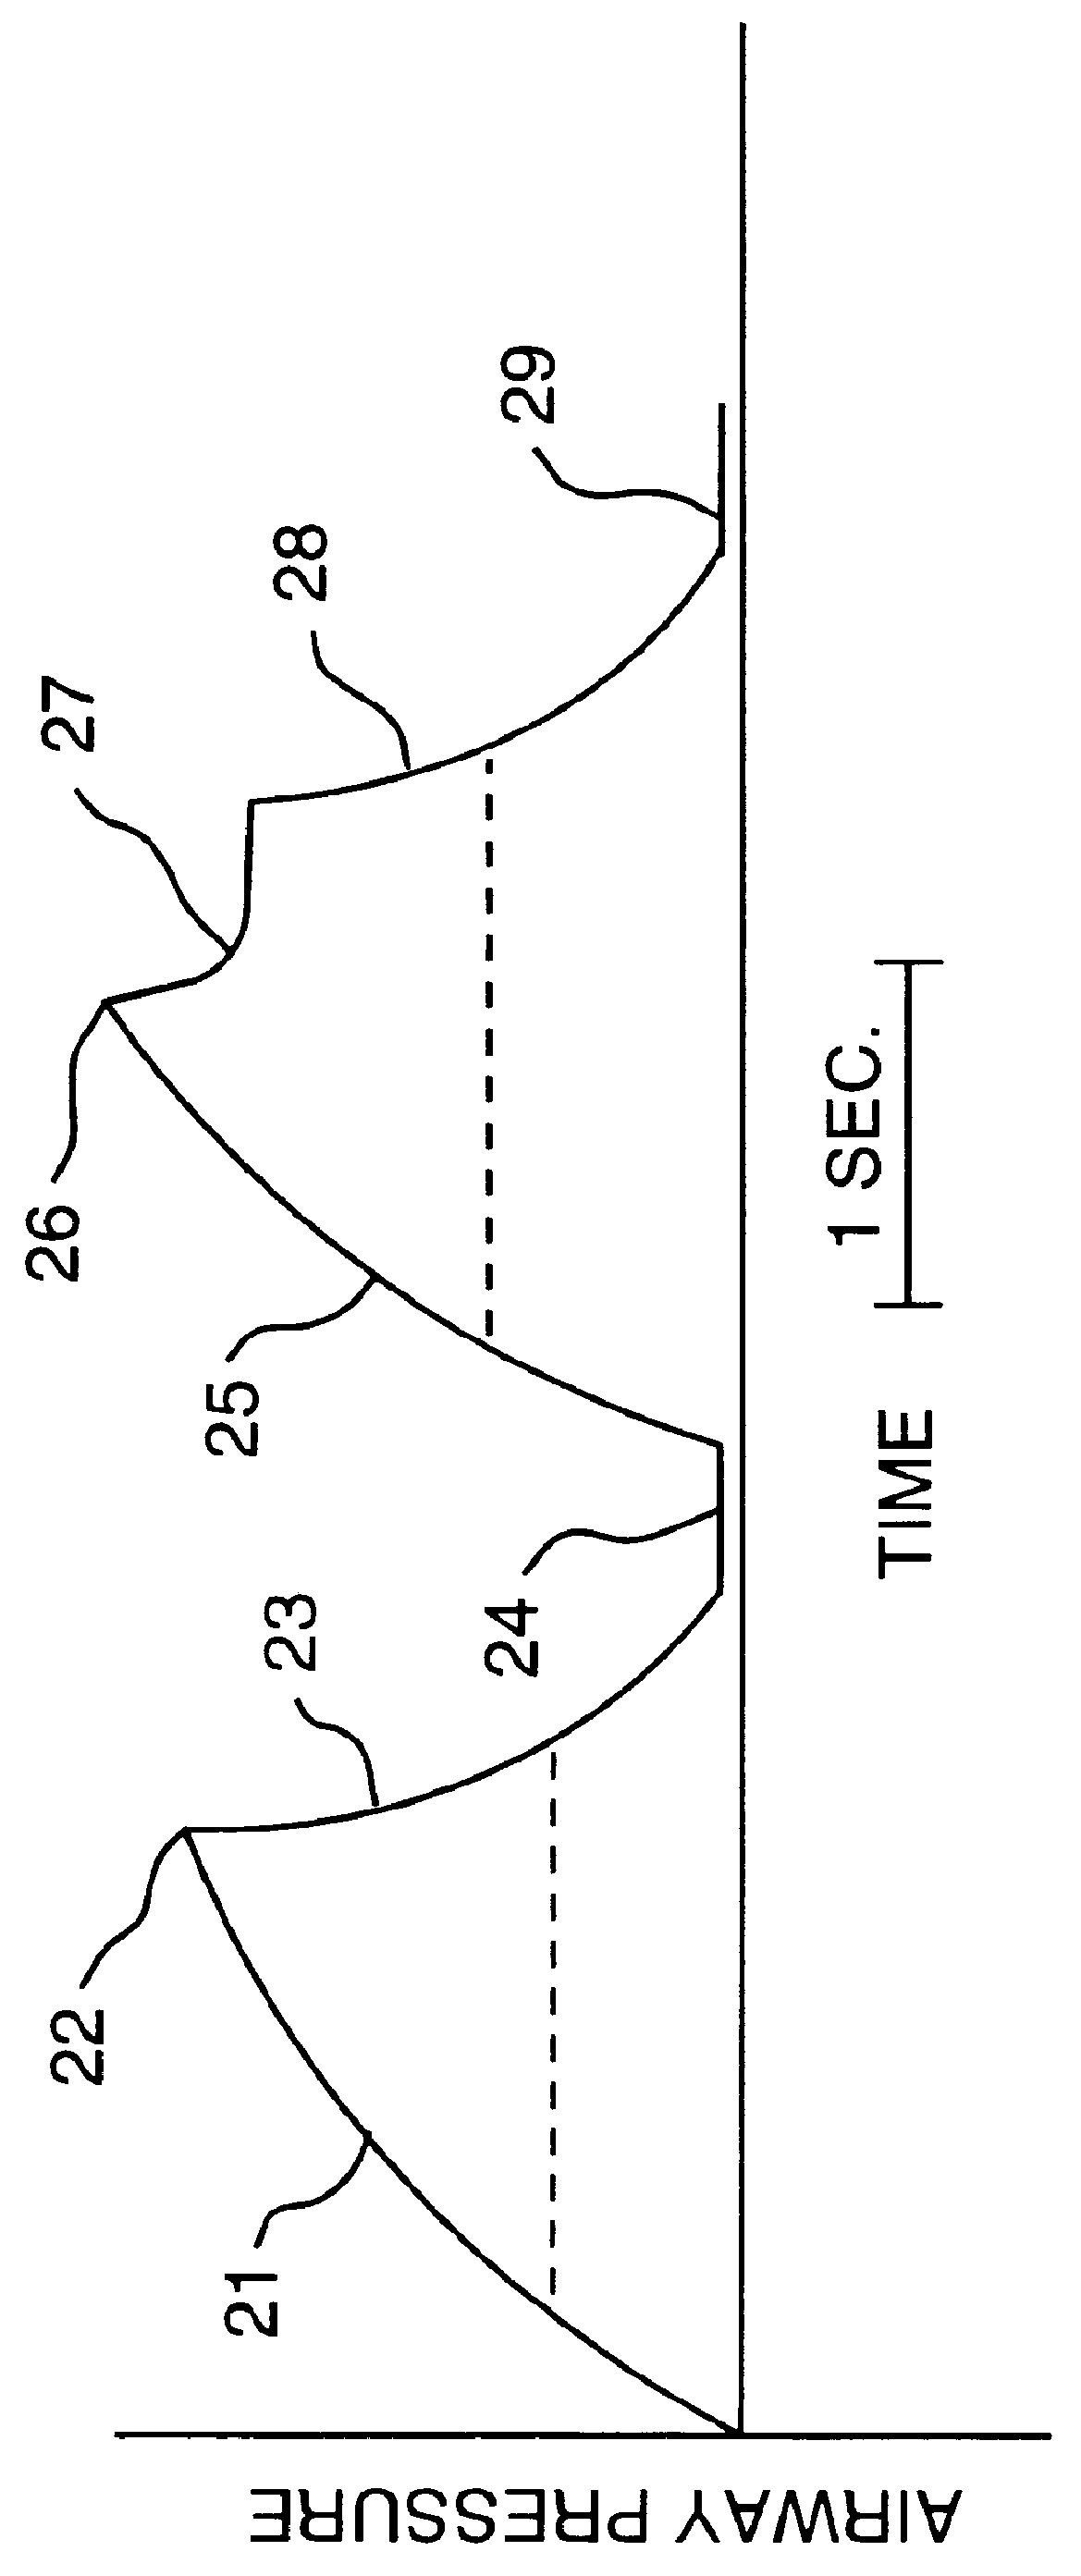 Method and apparatus for breathing during anesthesia